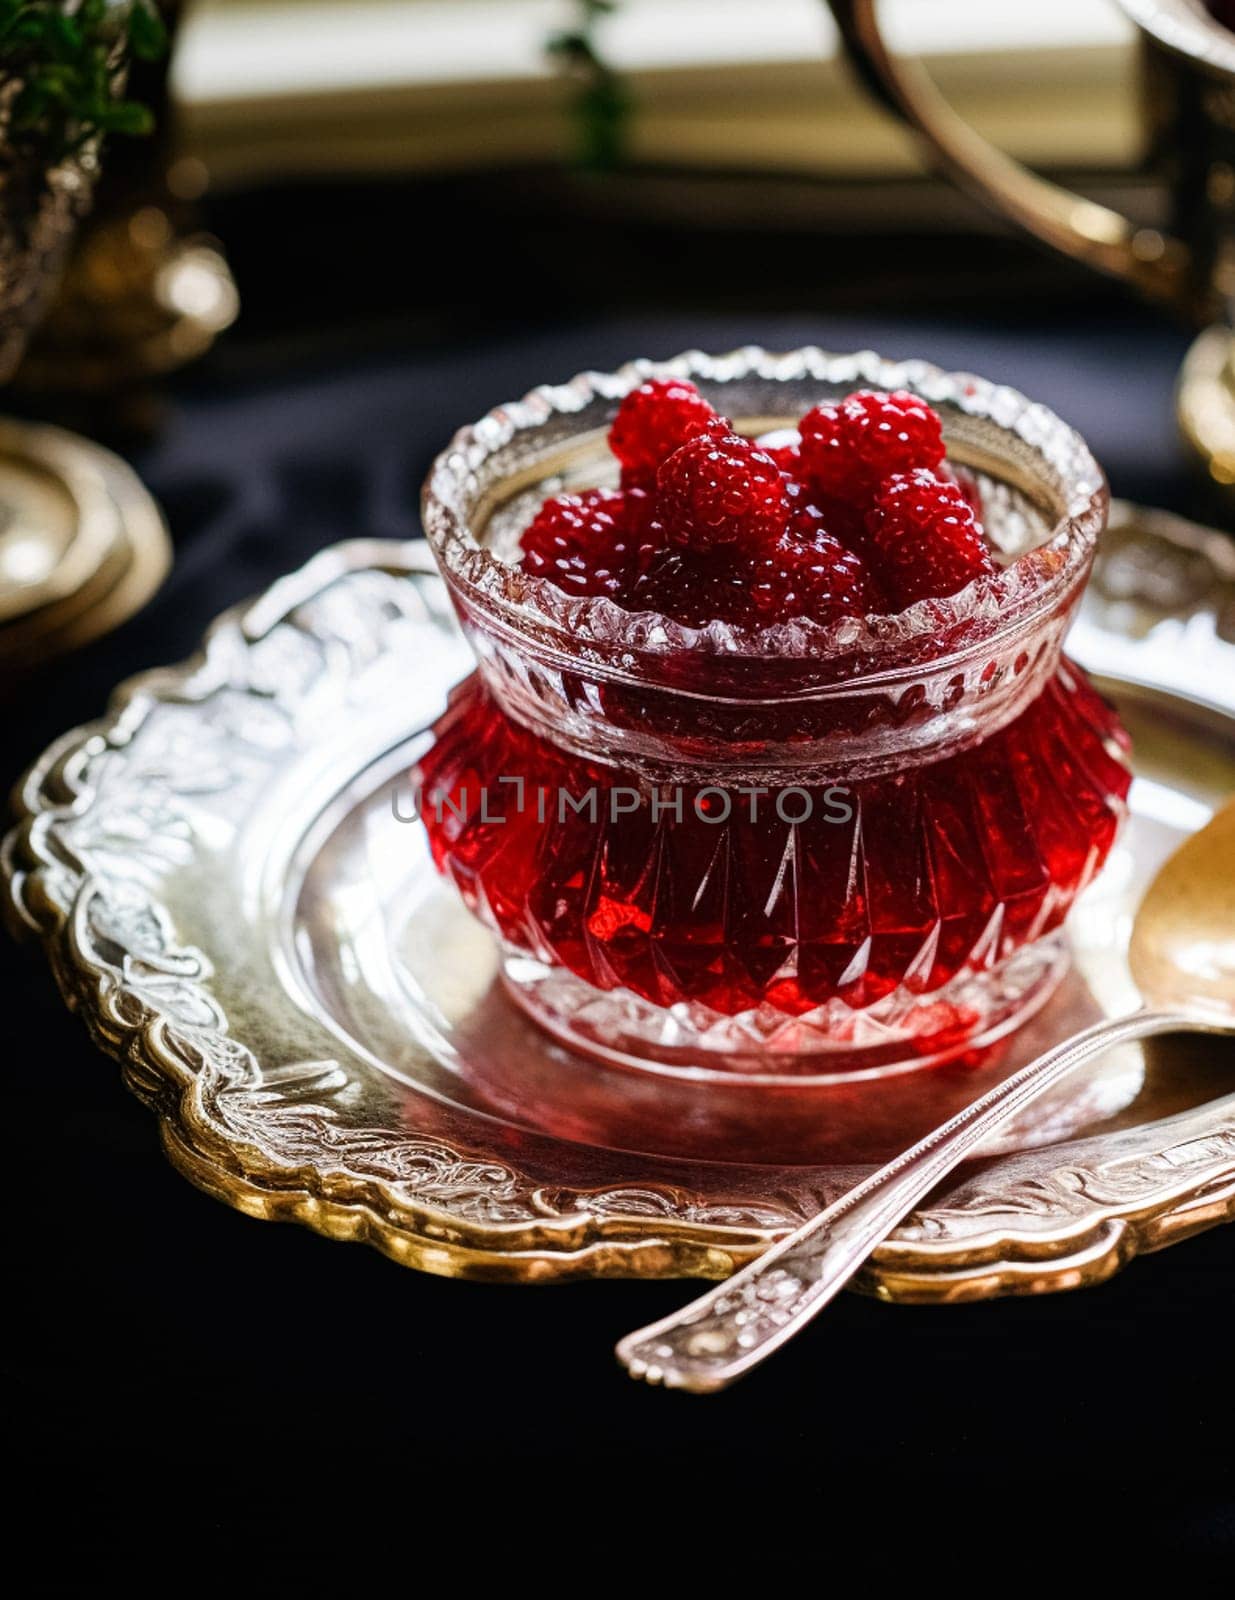 Raspberry jam and raspberries in a crystal bowl, country food and English recipe idea for menu, food blog and cookbook by Anneleven